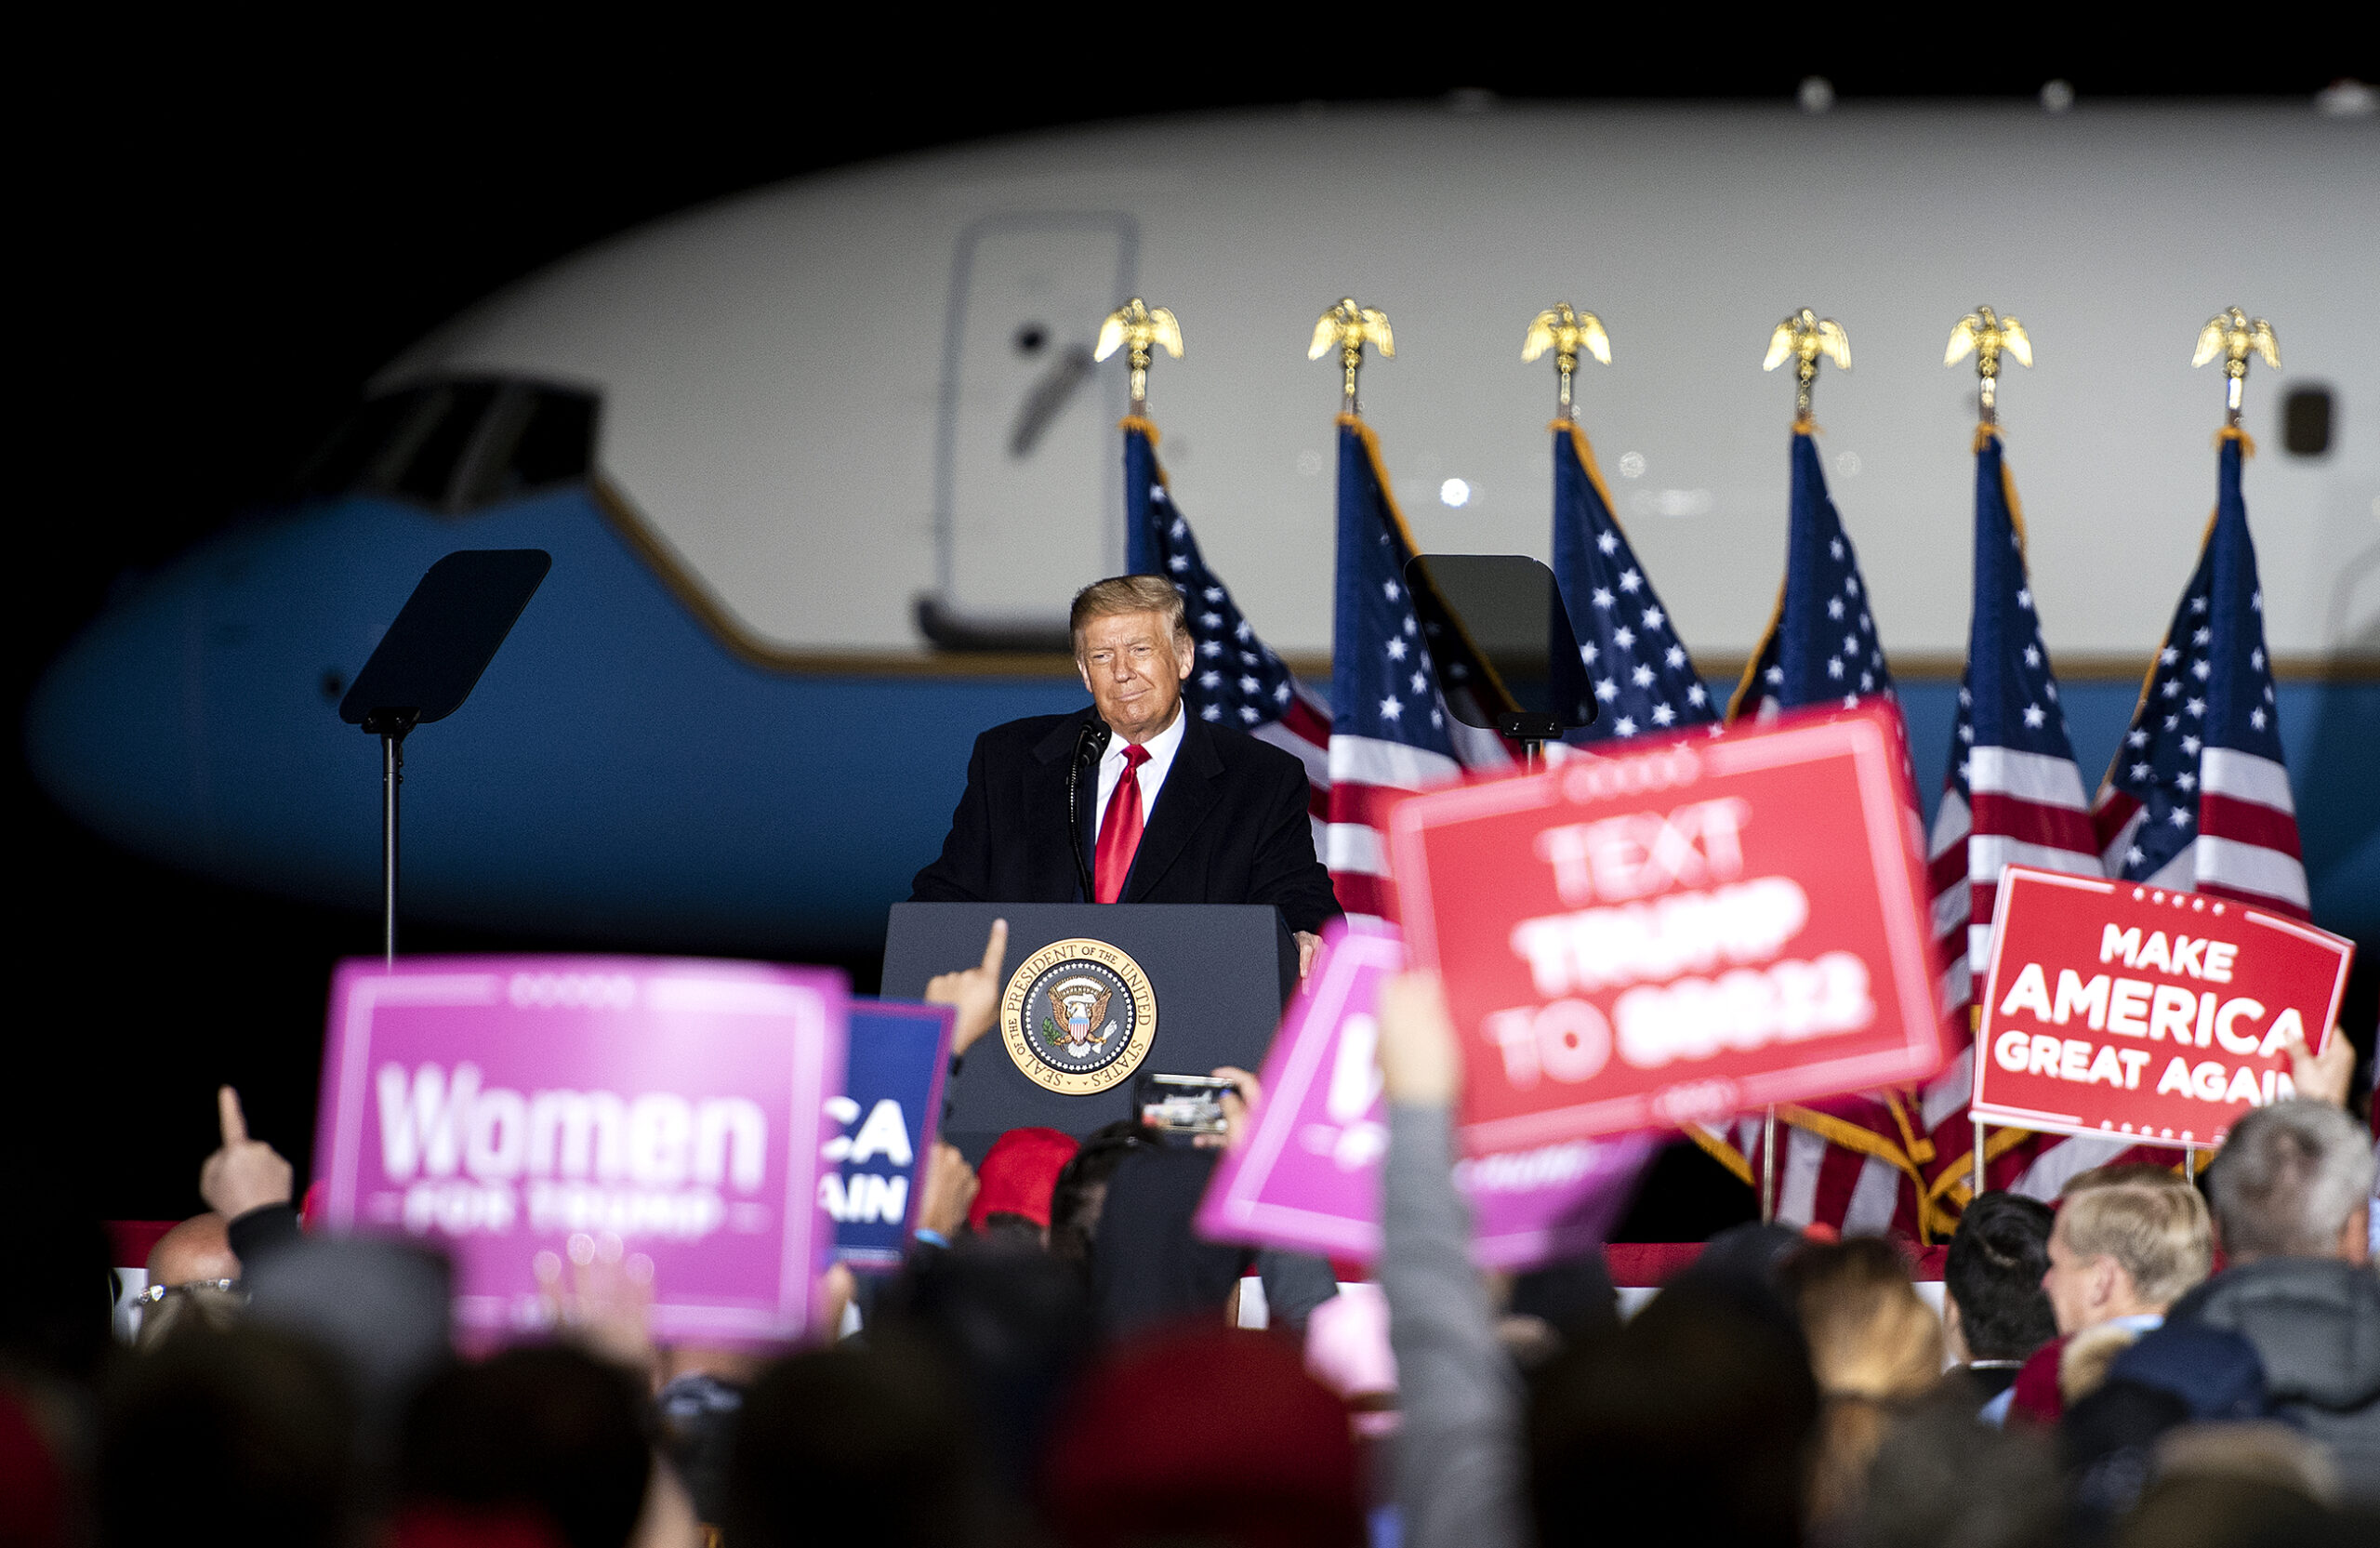 President Trump stands in front of Air Force One and a dark night sky as his supporters wave red and pink signs in the crowd